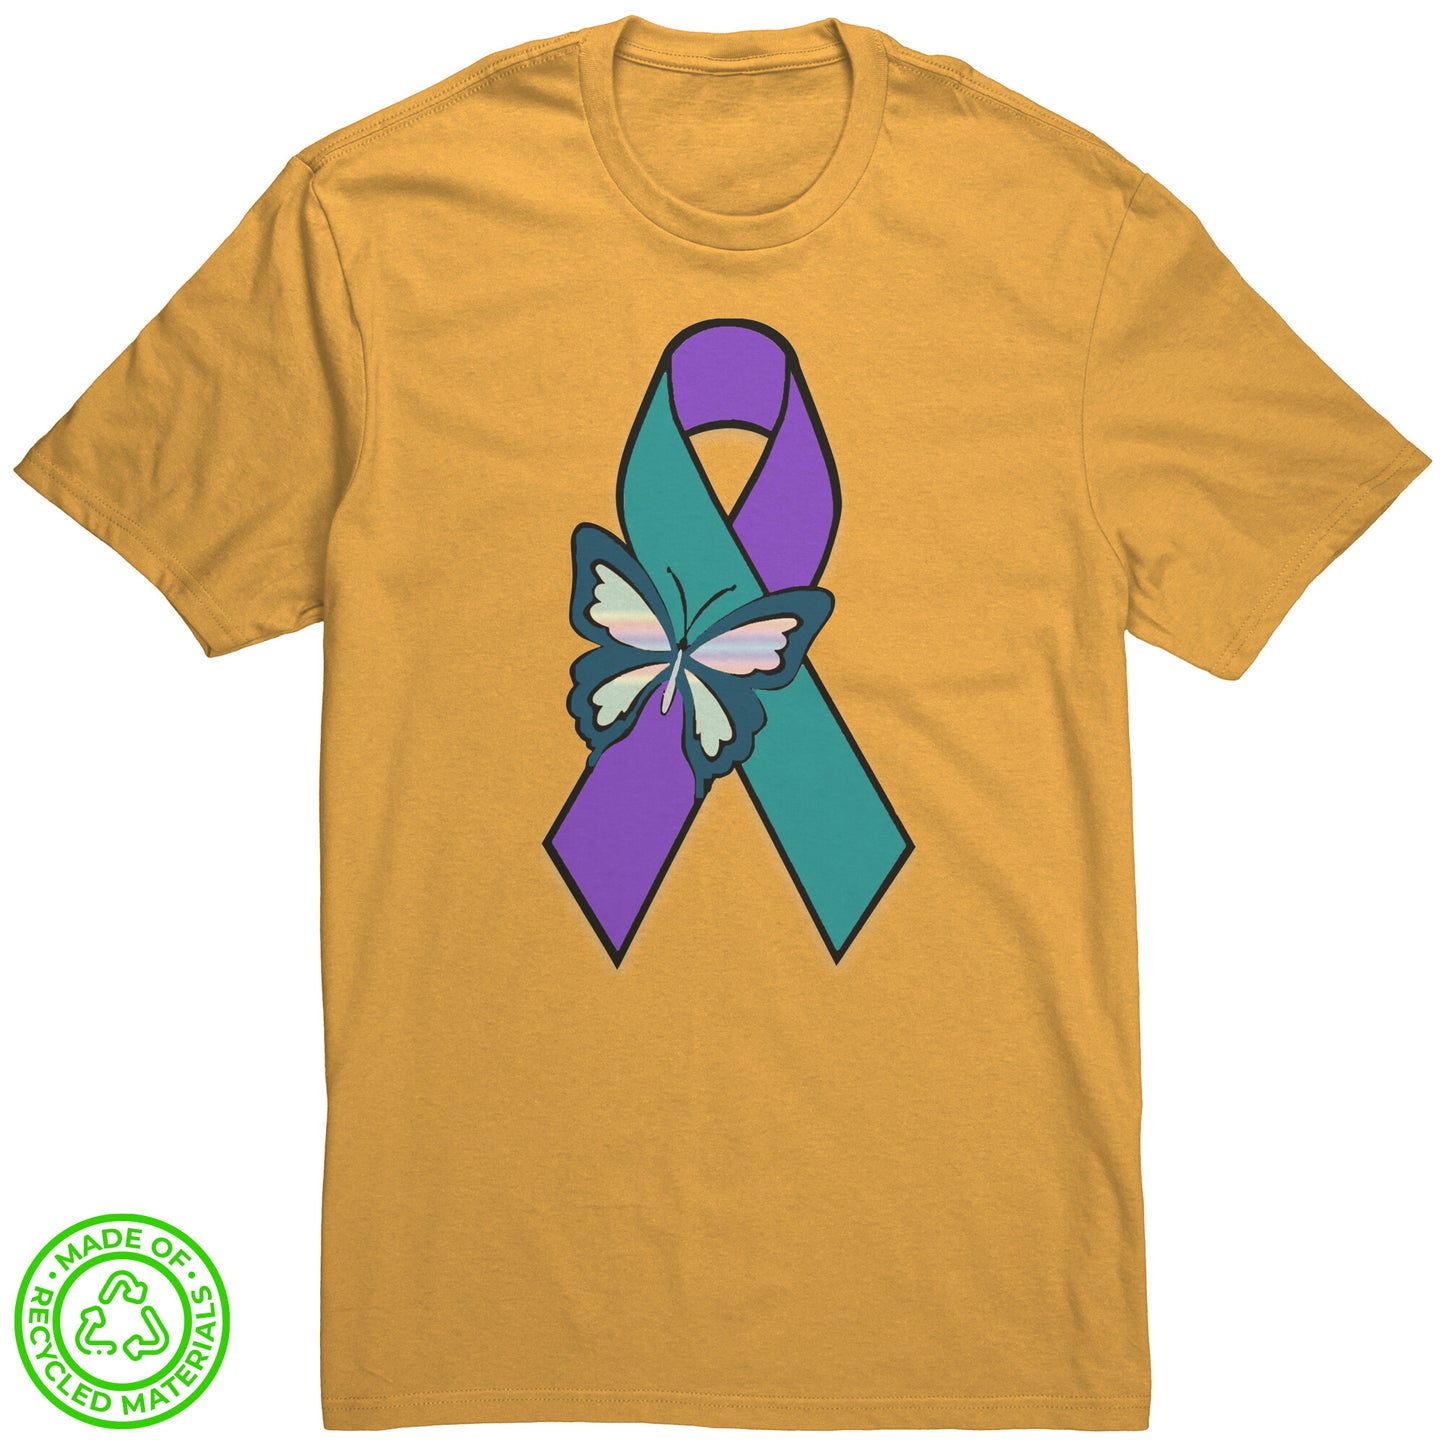 Suicide Awareness Butterfly Ribbon Recycled Fabric T-Shirt